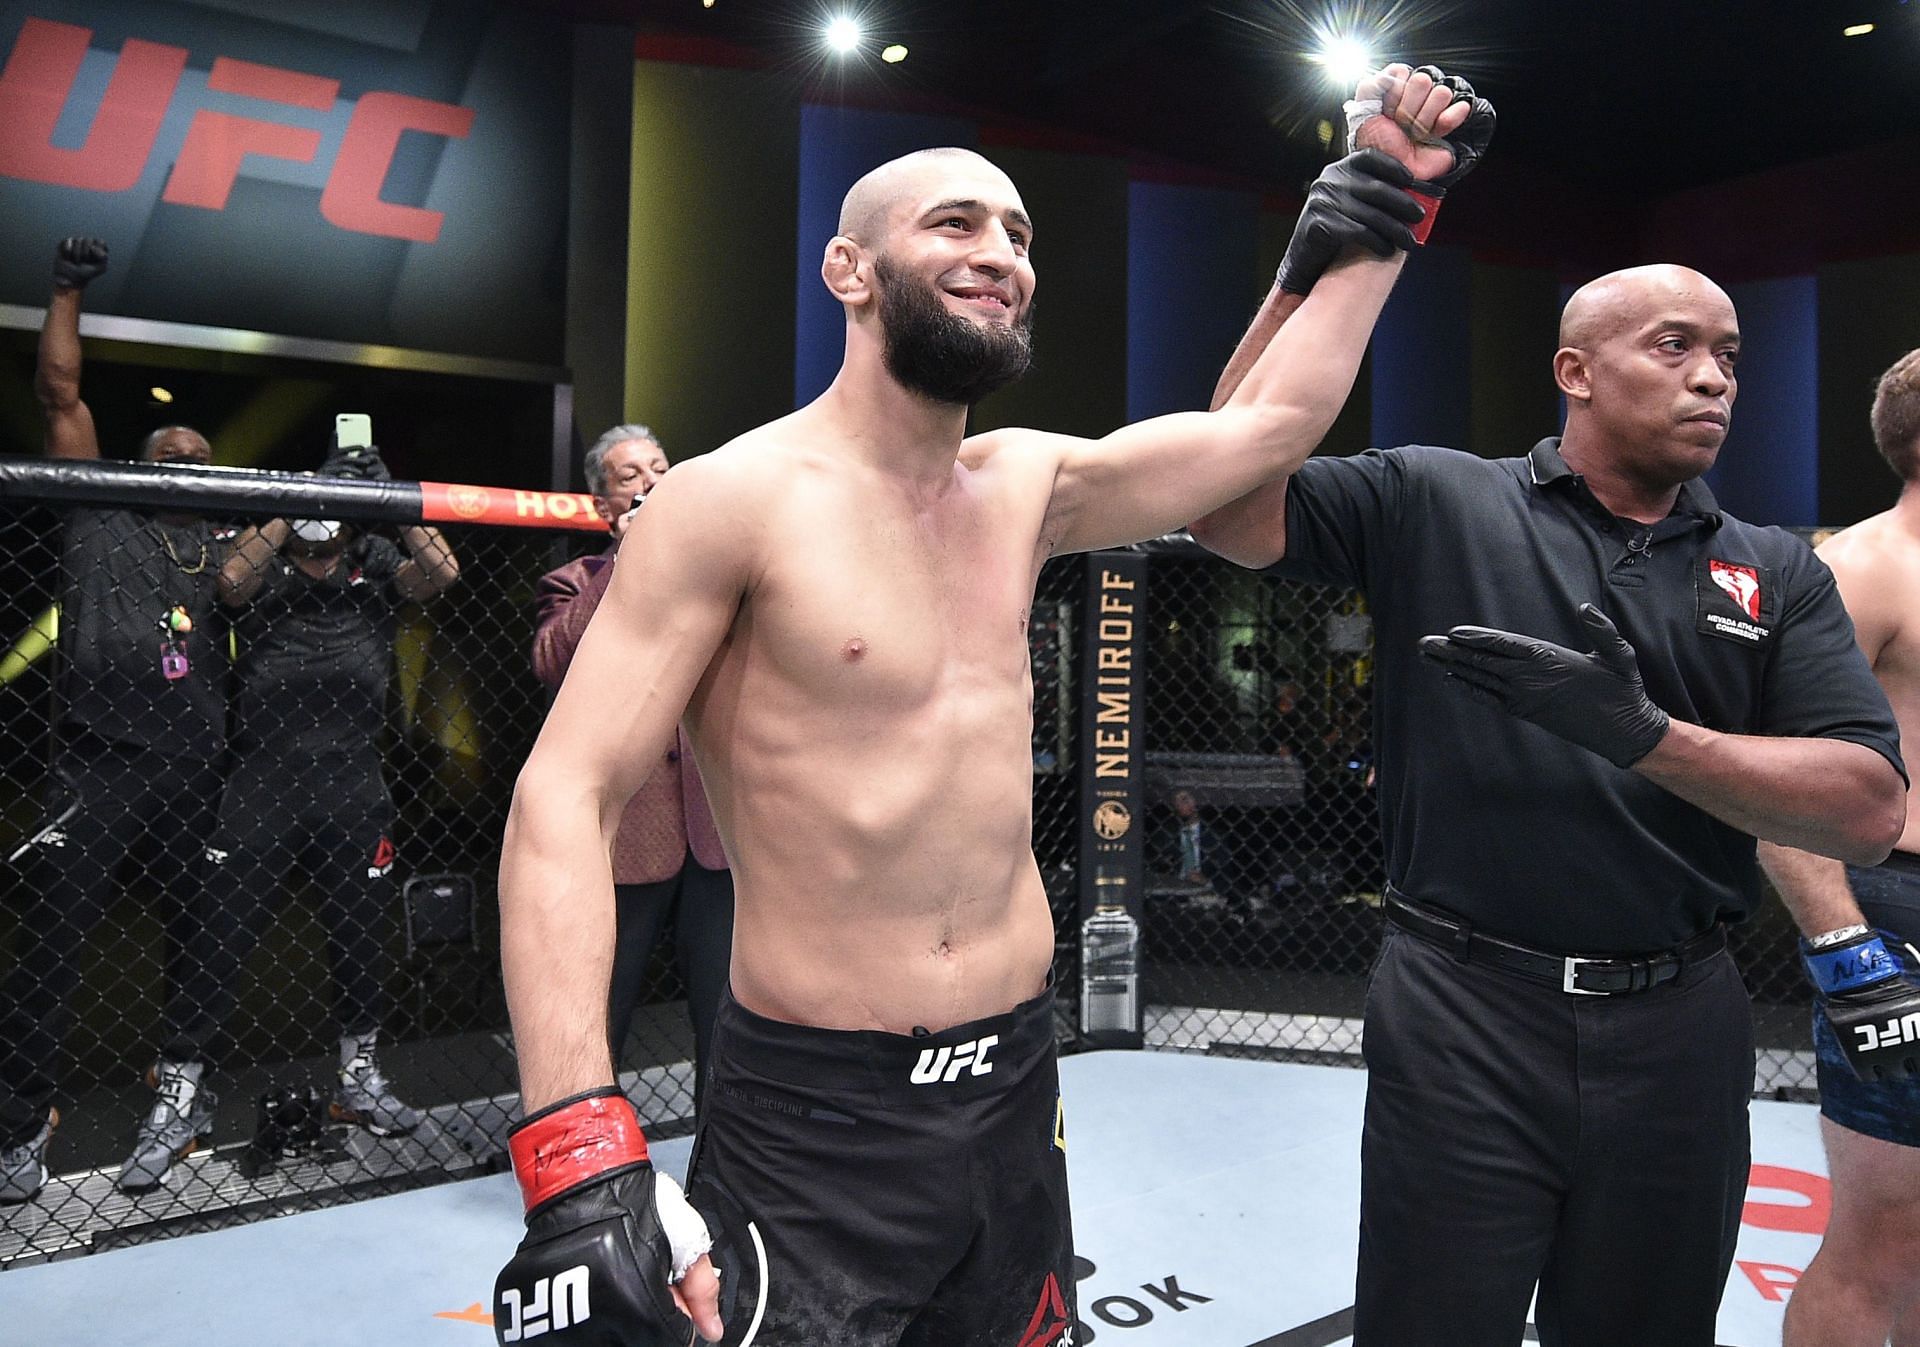 Khamzat Chimaev seems destined to make it to the top of the UFC in a short period of time